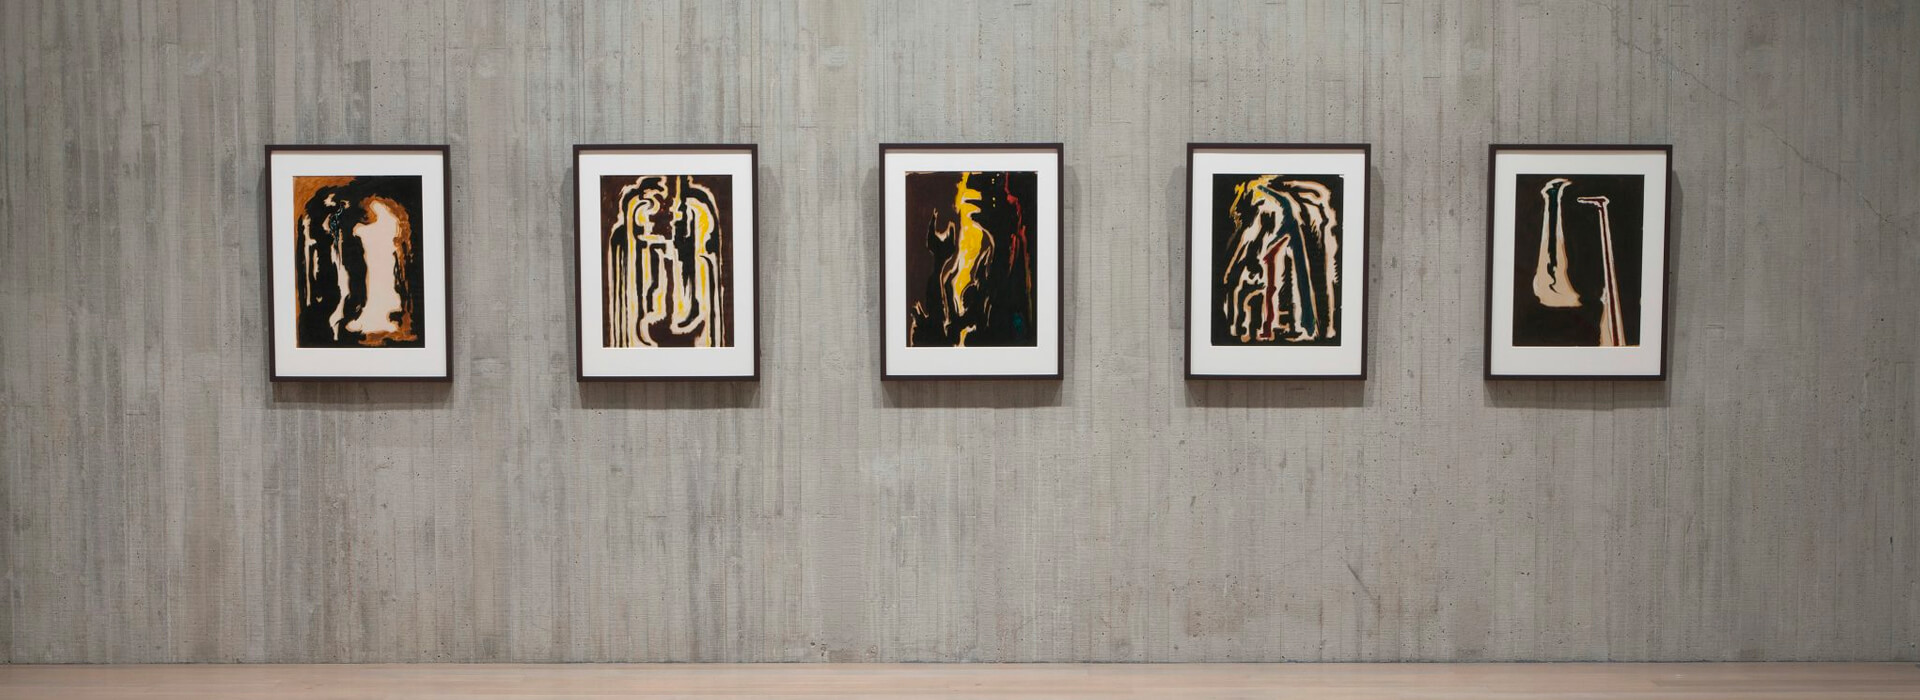 Framed abstract artworks on paper hang on a concrete wall